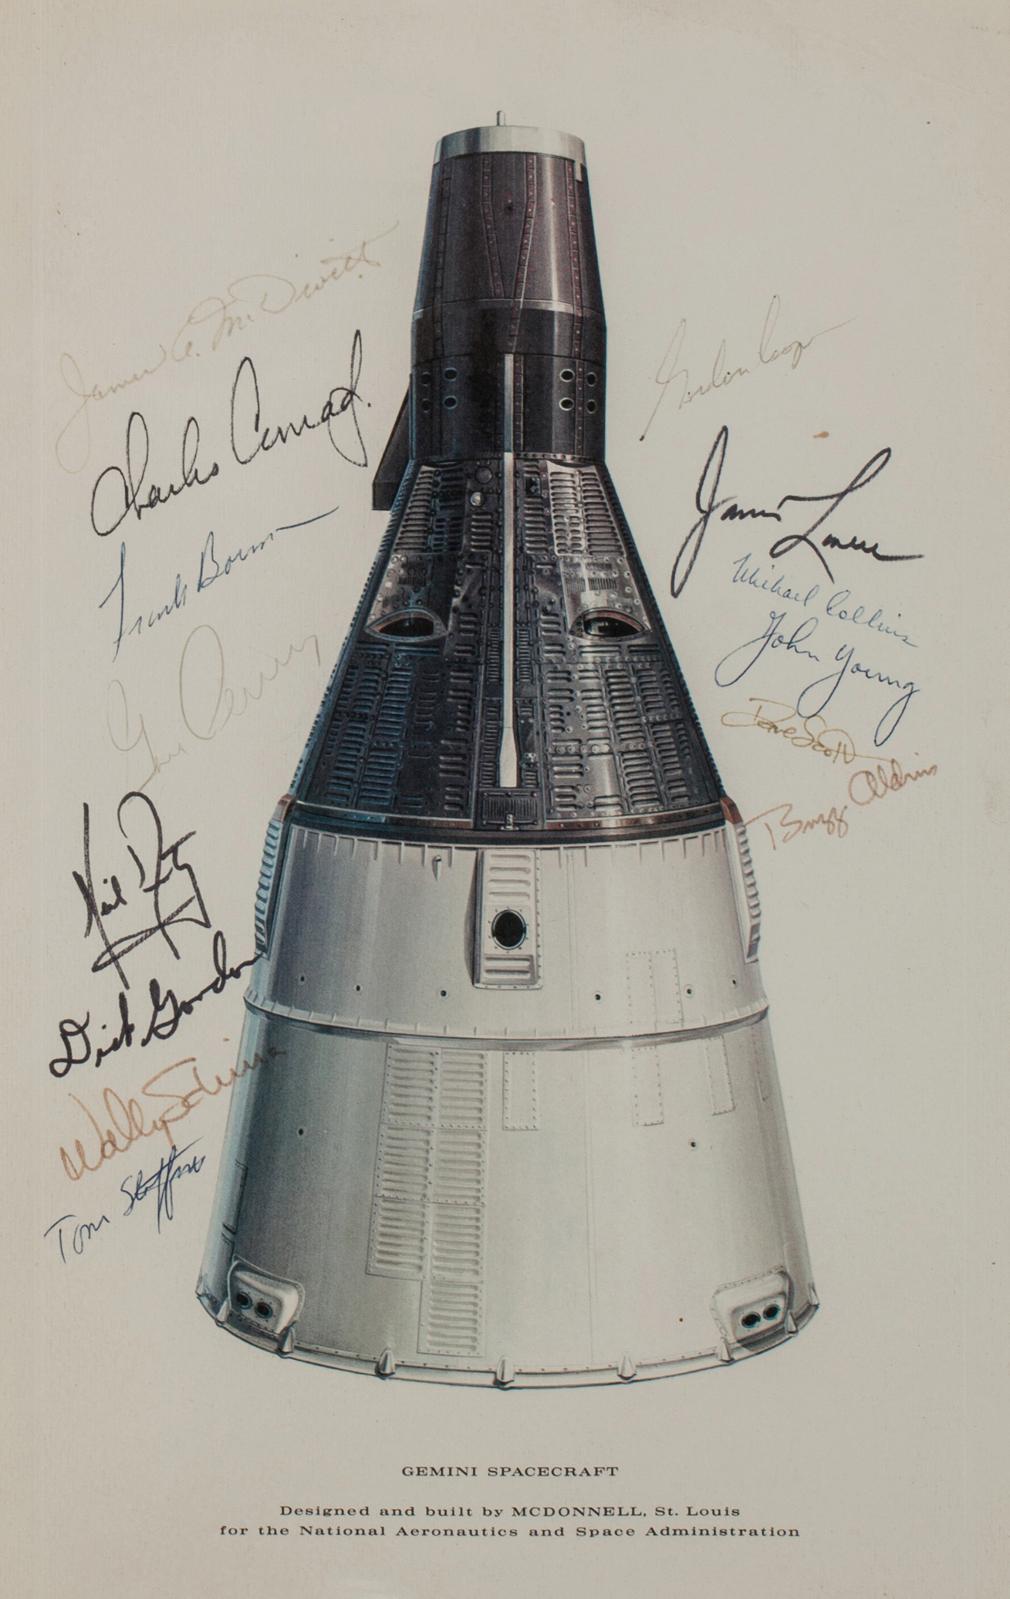 4 464 € Apollo, Gemini Spacecraft. Designed and Built by McDonnell, St. Louis for the National Aeronautics and Space Administration, gravure, 14 signa